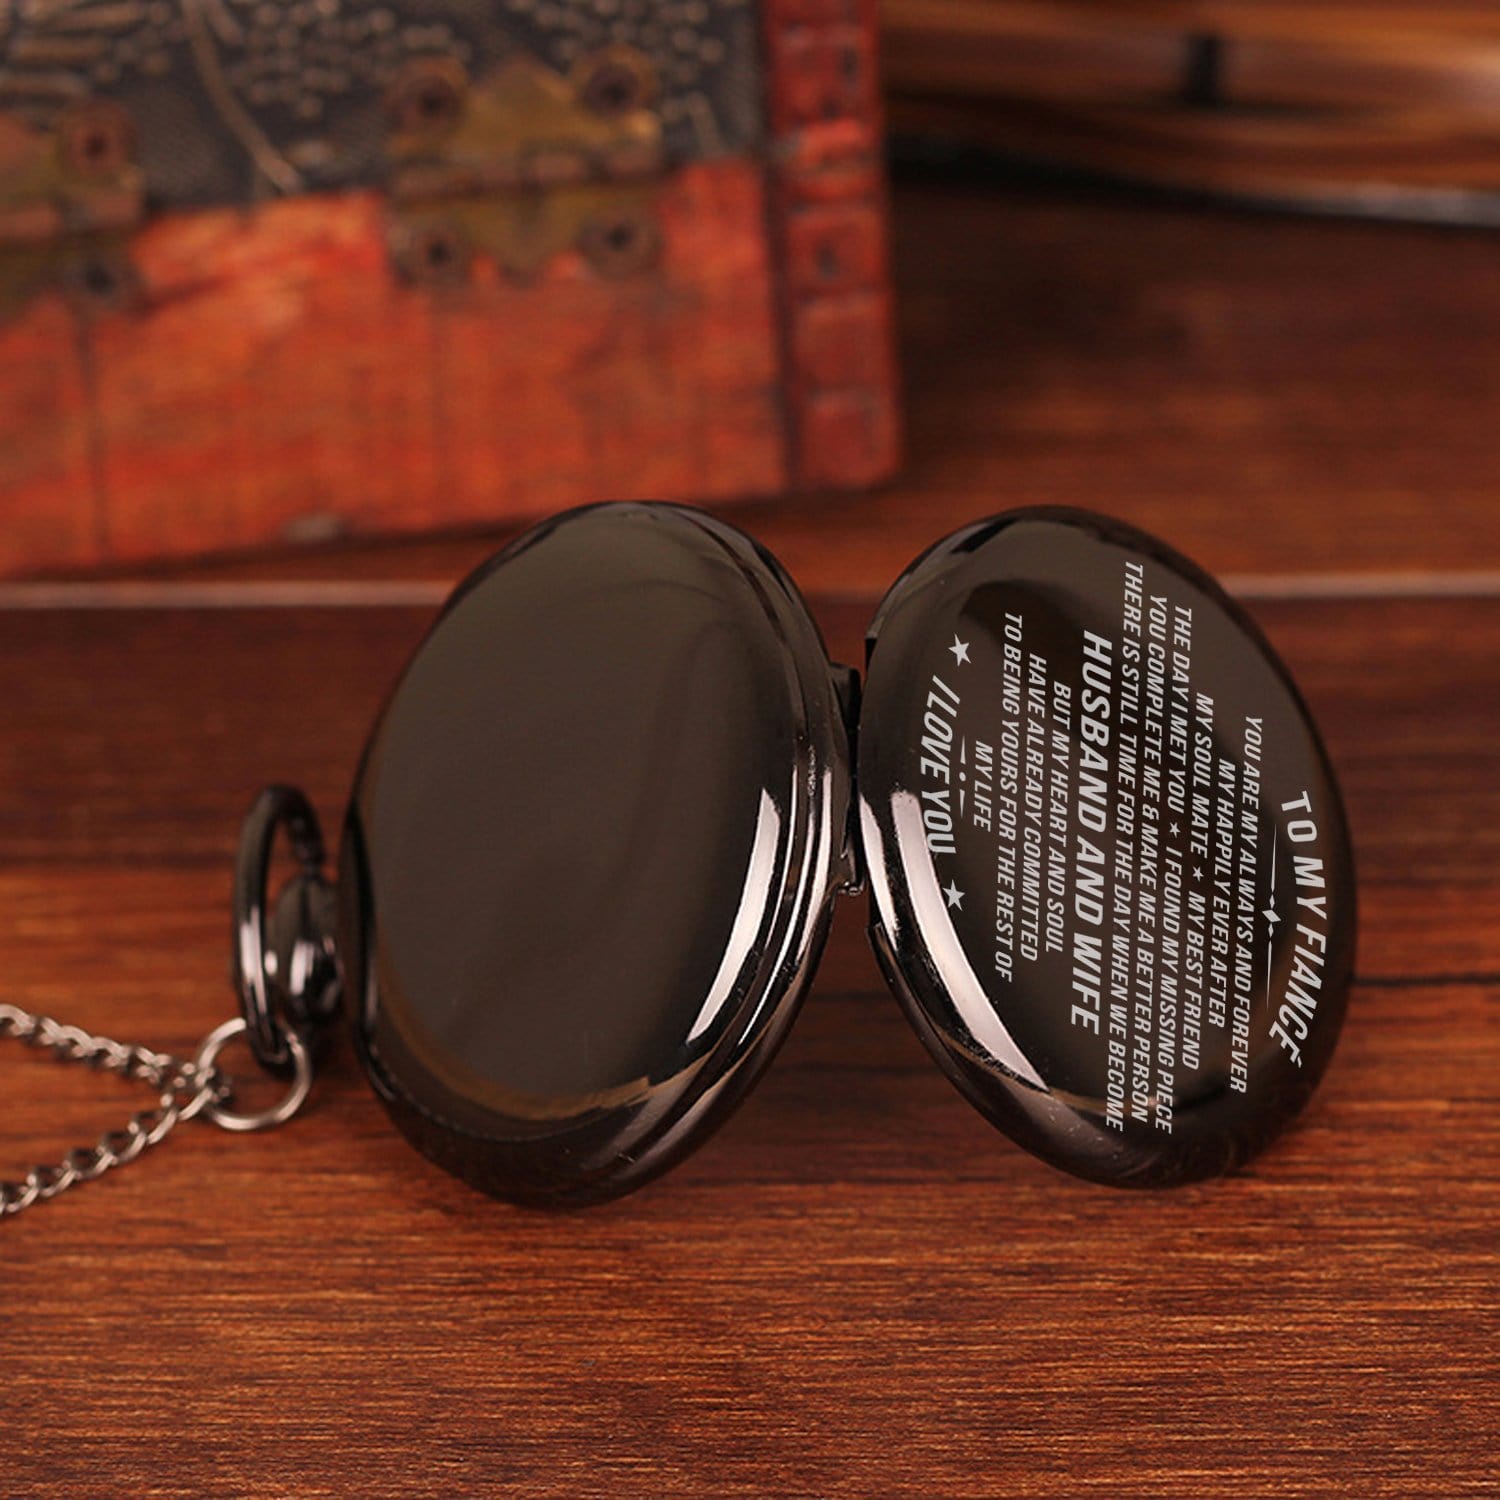 Pocket Watches To My Fiance - I Love You Pocket Watch GiveMe-Gifts